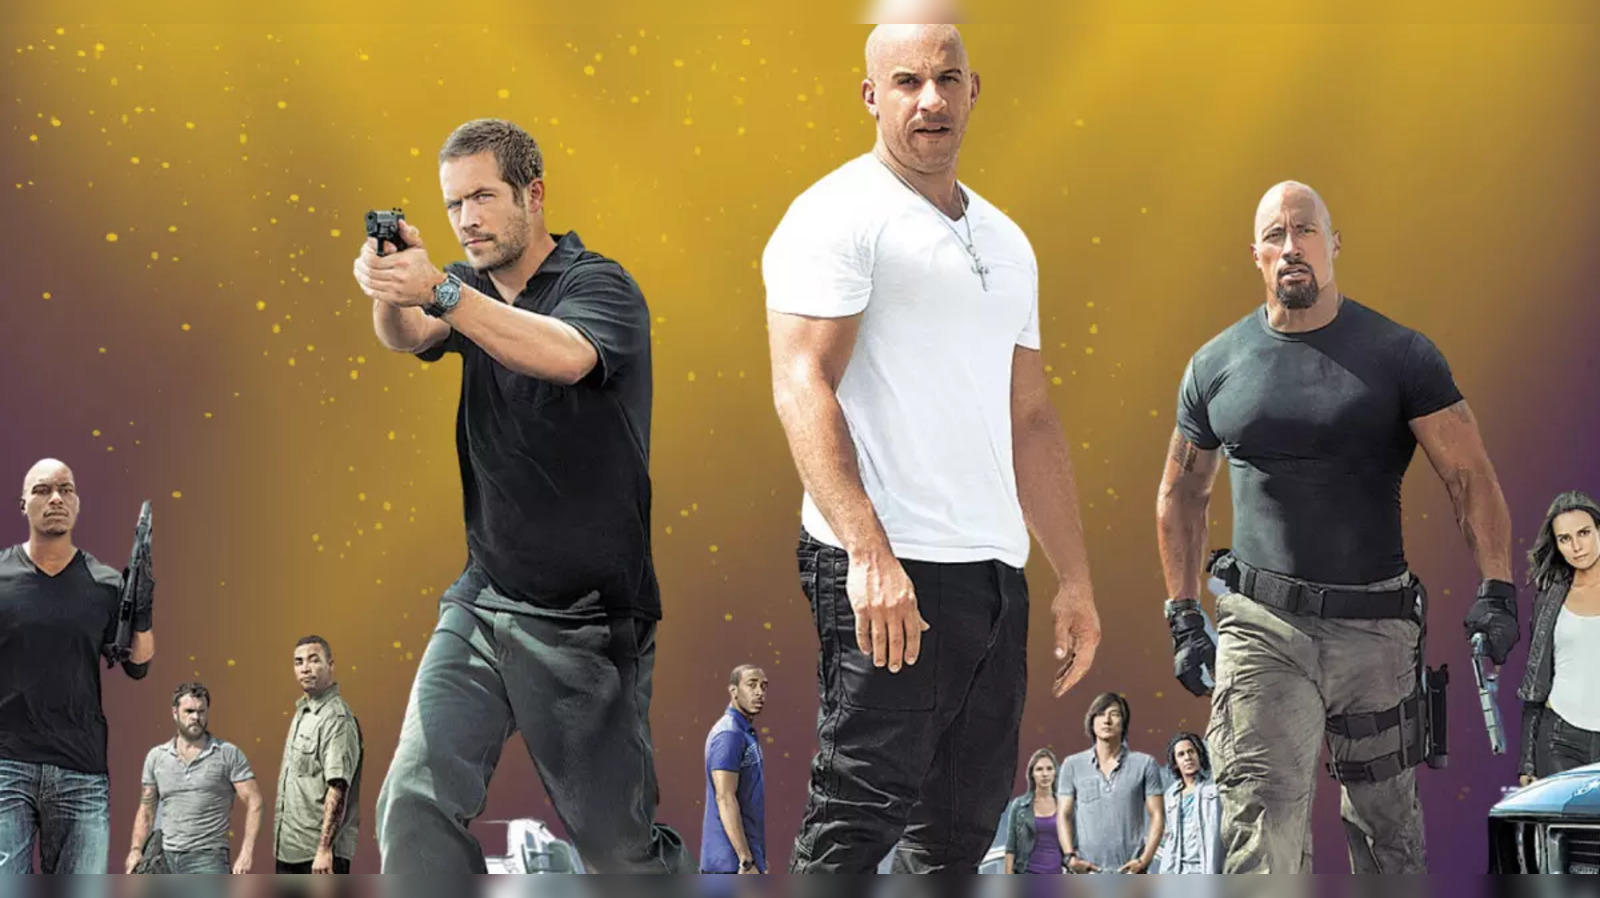 Cast of Fast & Furious 7: Every Actor & Character Who Appears